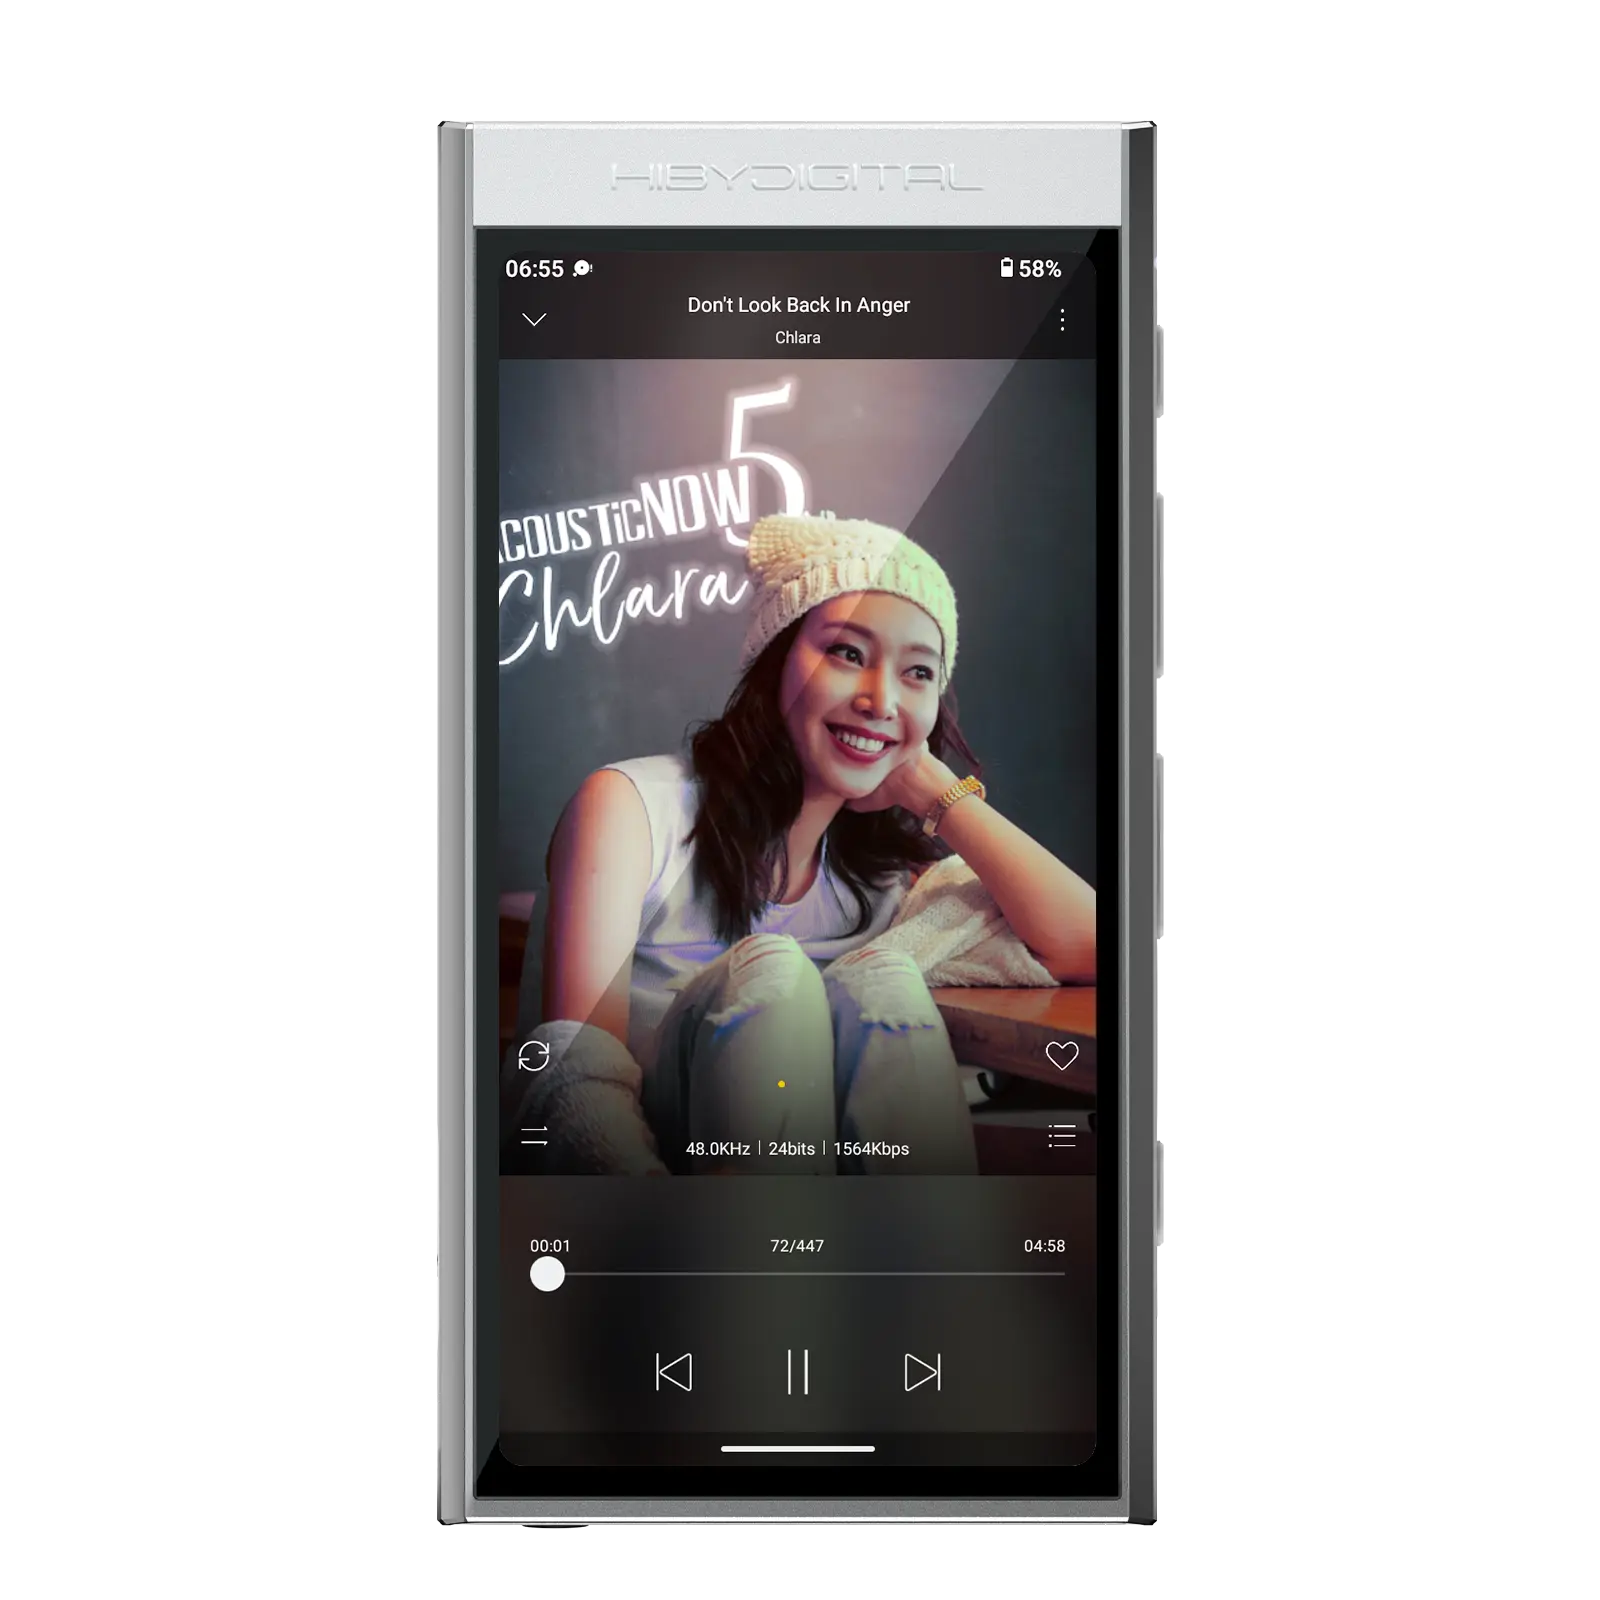 HiBy Digital M300 - Pocketable Android Digital Audio Player HiBy | Make Music More Musical